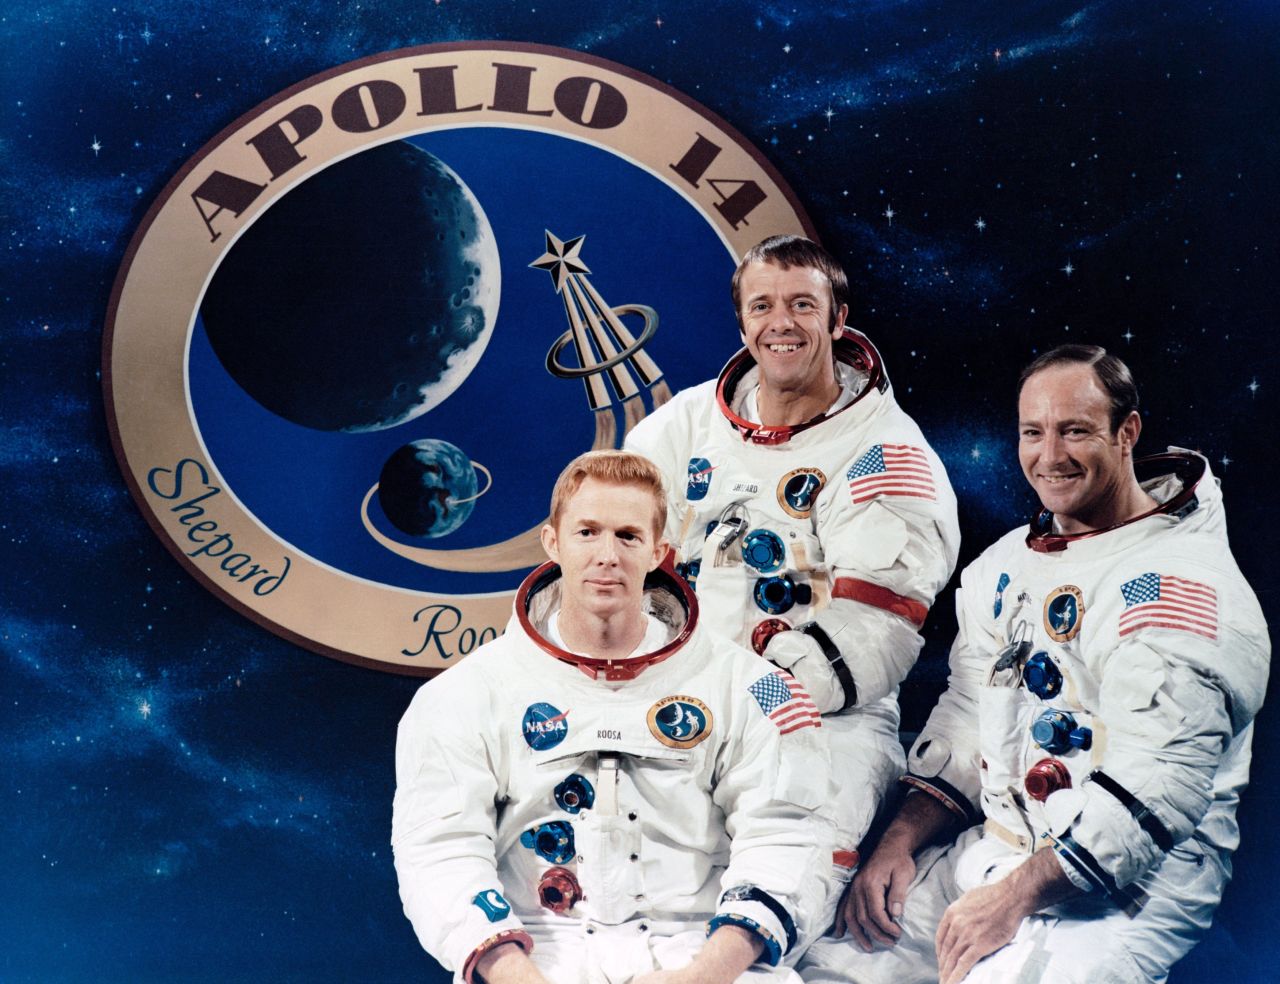 The crew of Apollo 14: from left, Stuart Roosa, Alan Shepard and Edgar Mitchell. The mission launched January 31, 1971, landed on the moon February 5 and returned to Earth on February 9. Shepard and Mitchell conducted moonwalks while Roosa orbited in the command module. 